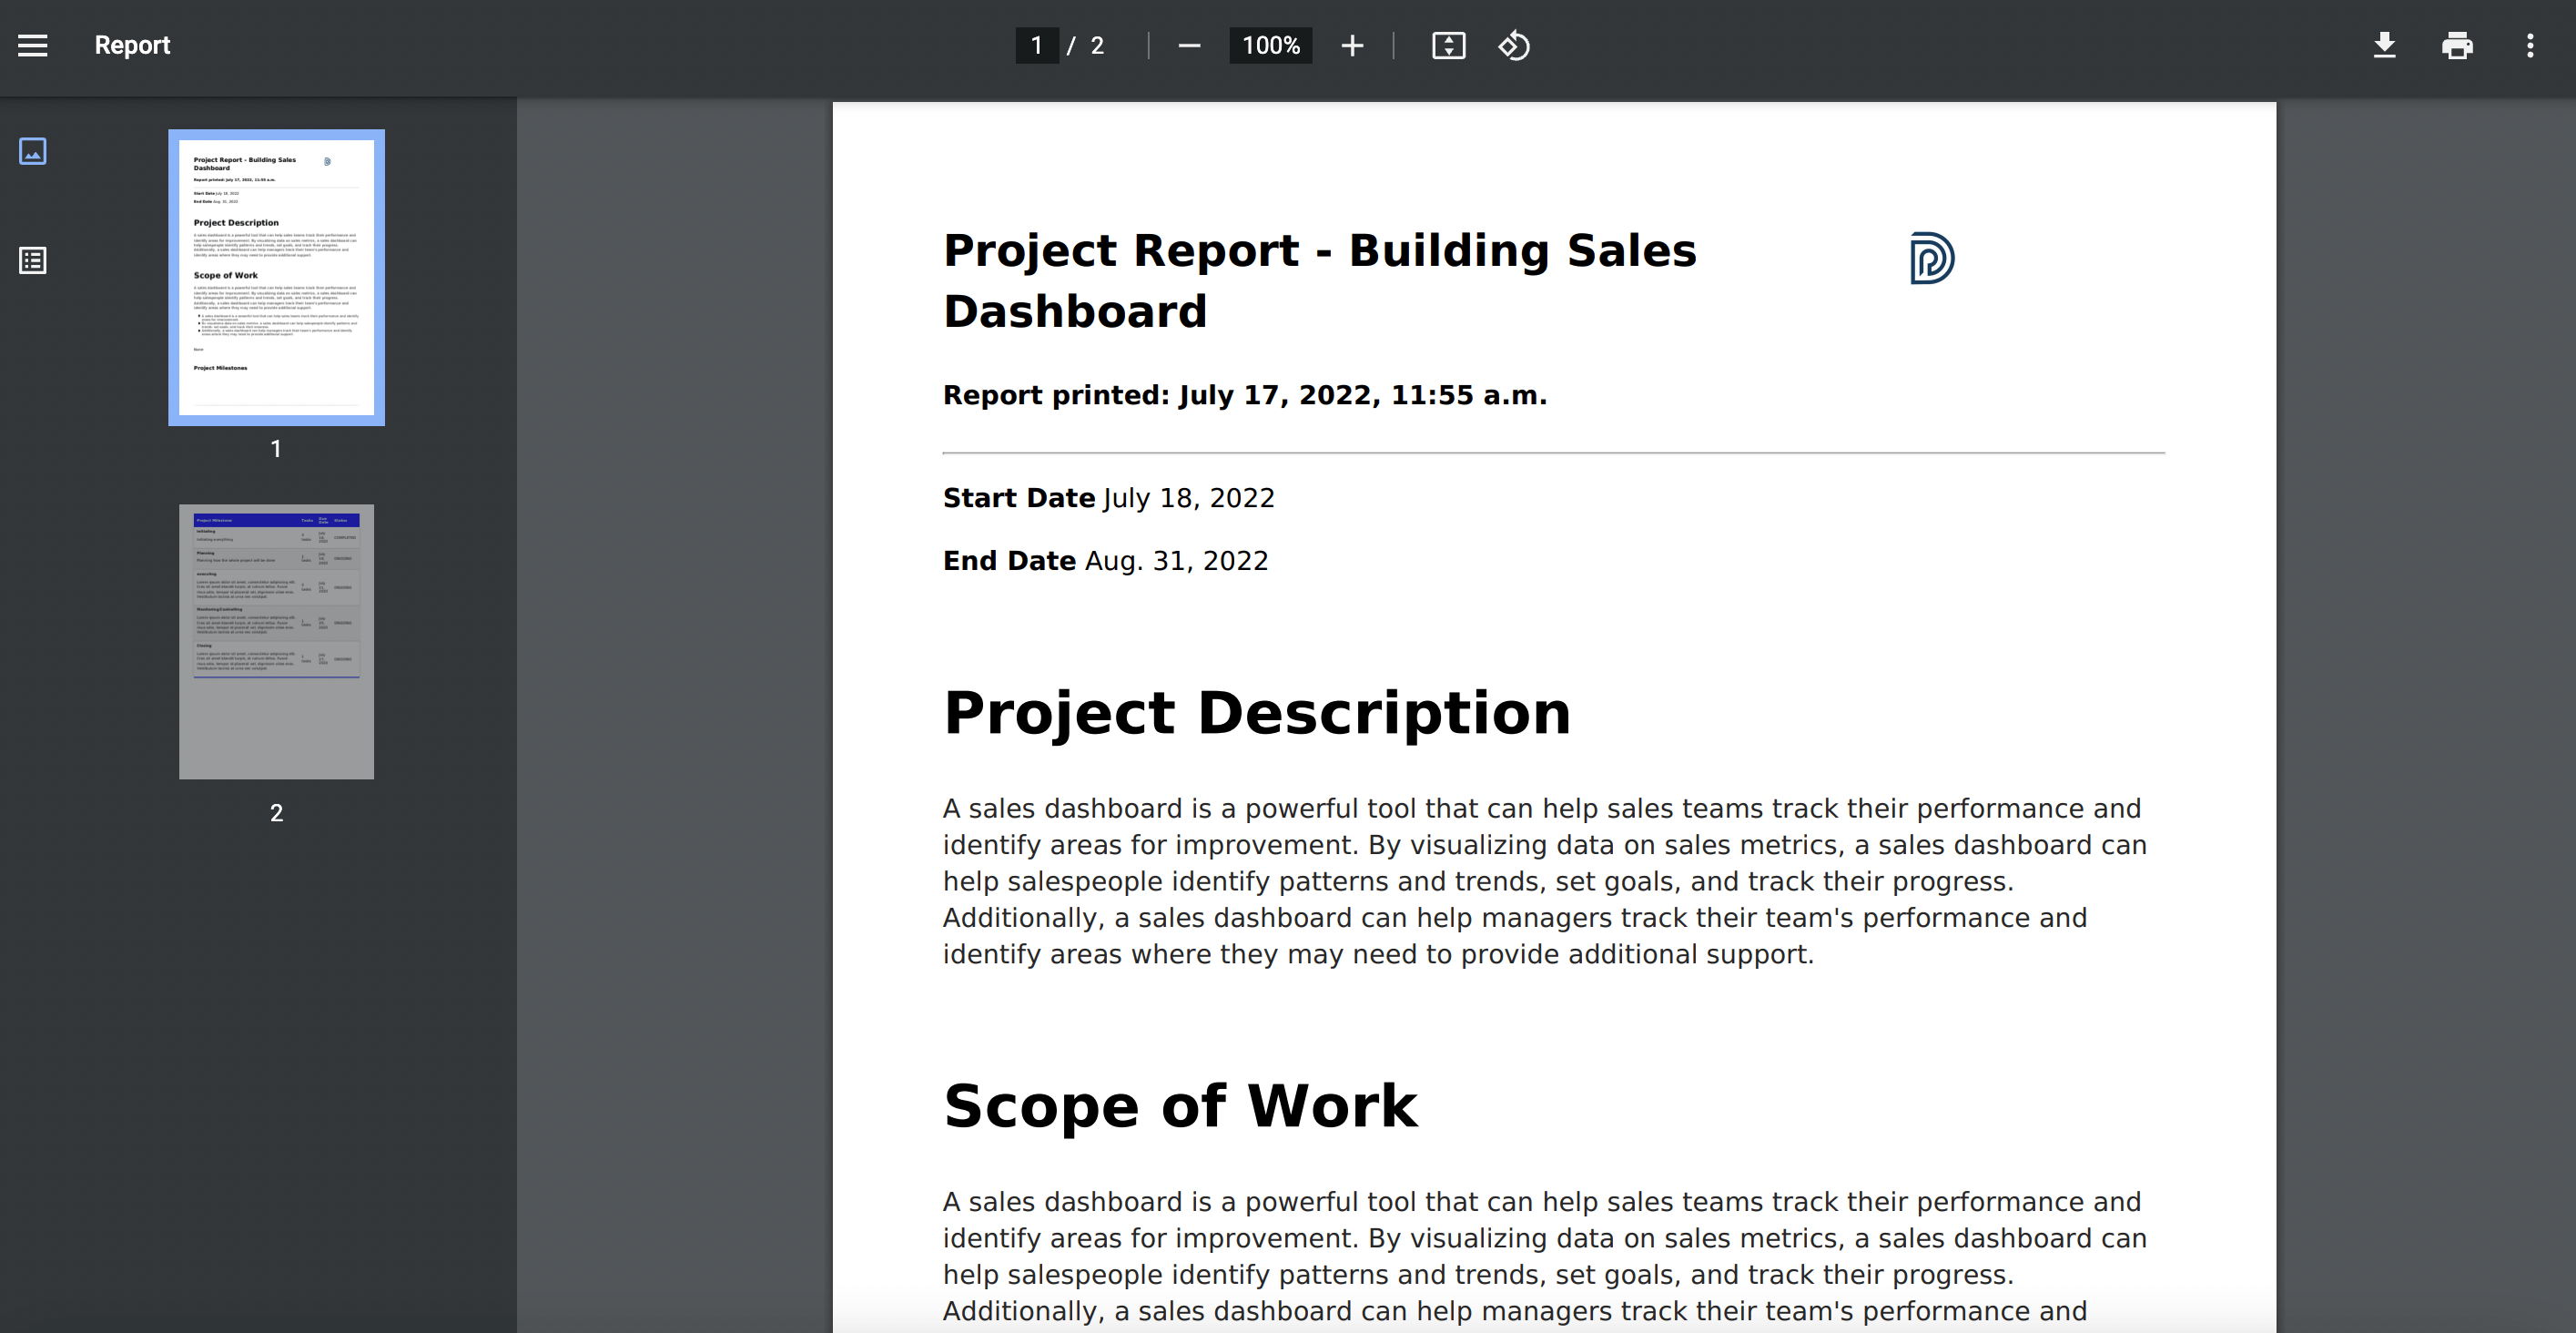 View Project Report in PDF